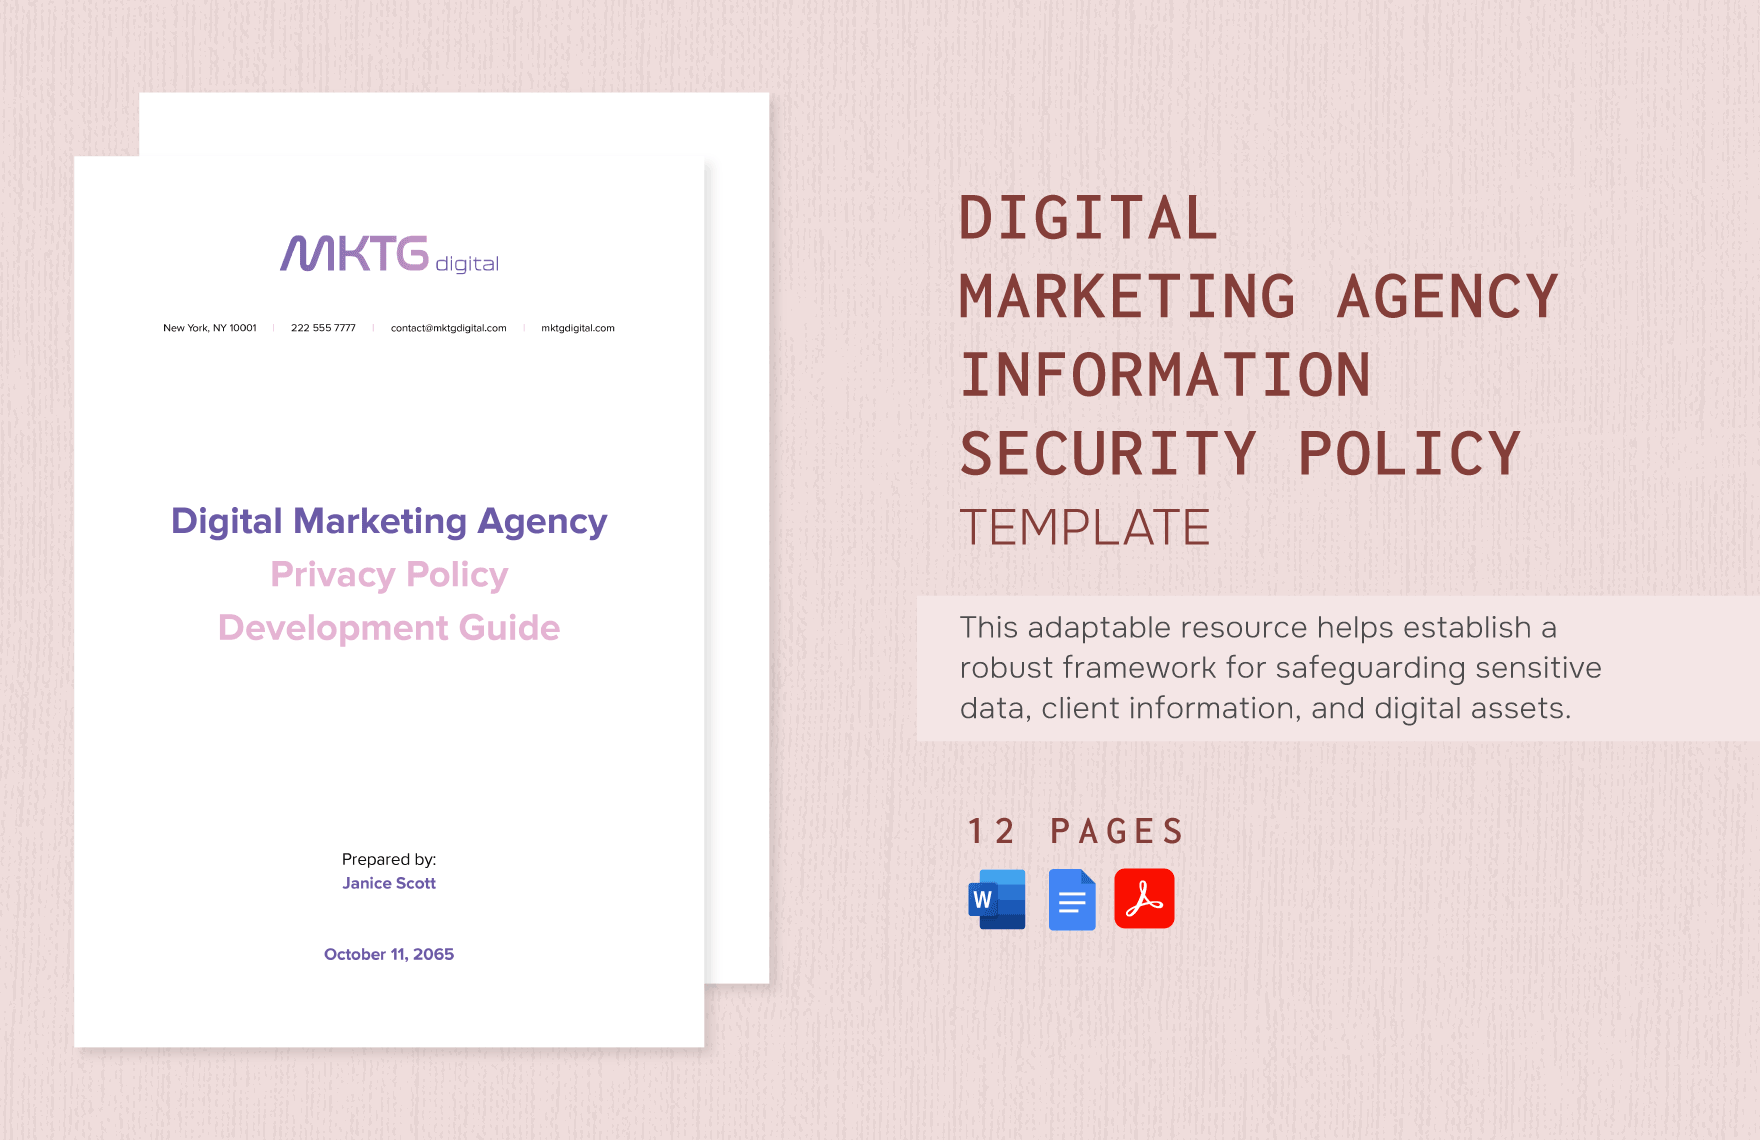 Digital Marketing Agency Information Security Policy Template